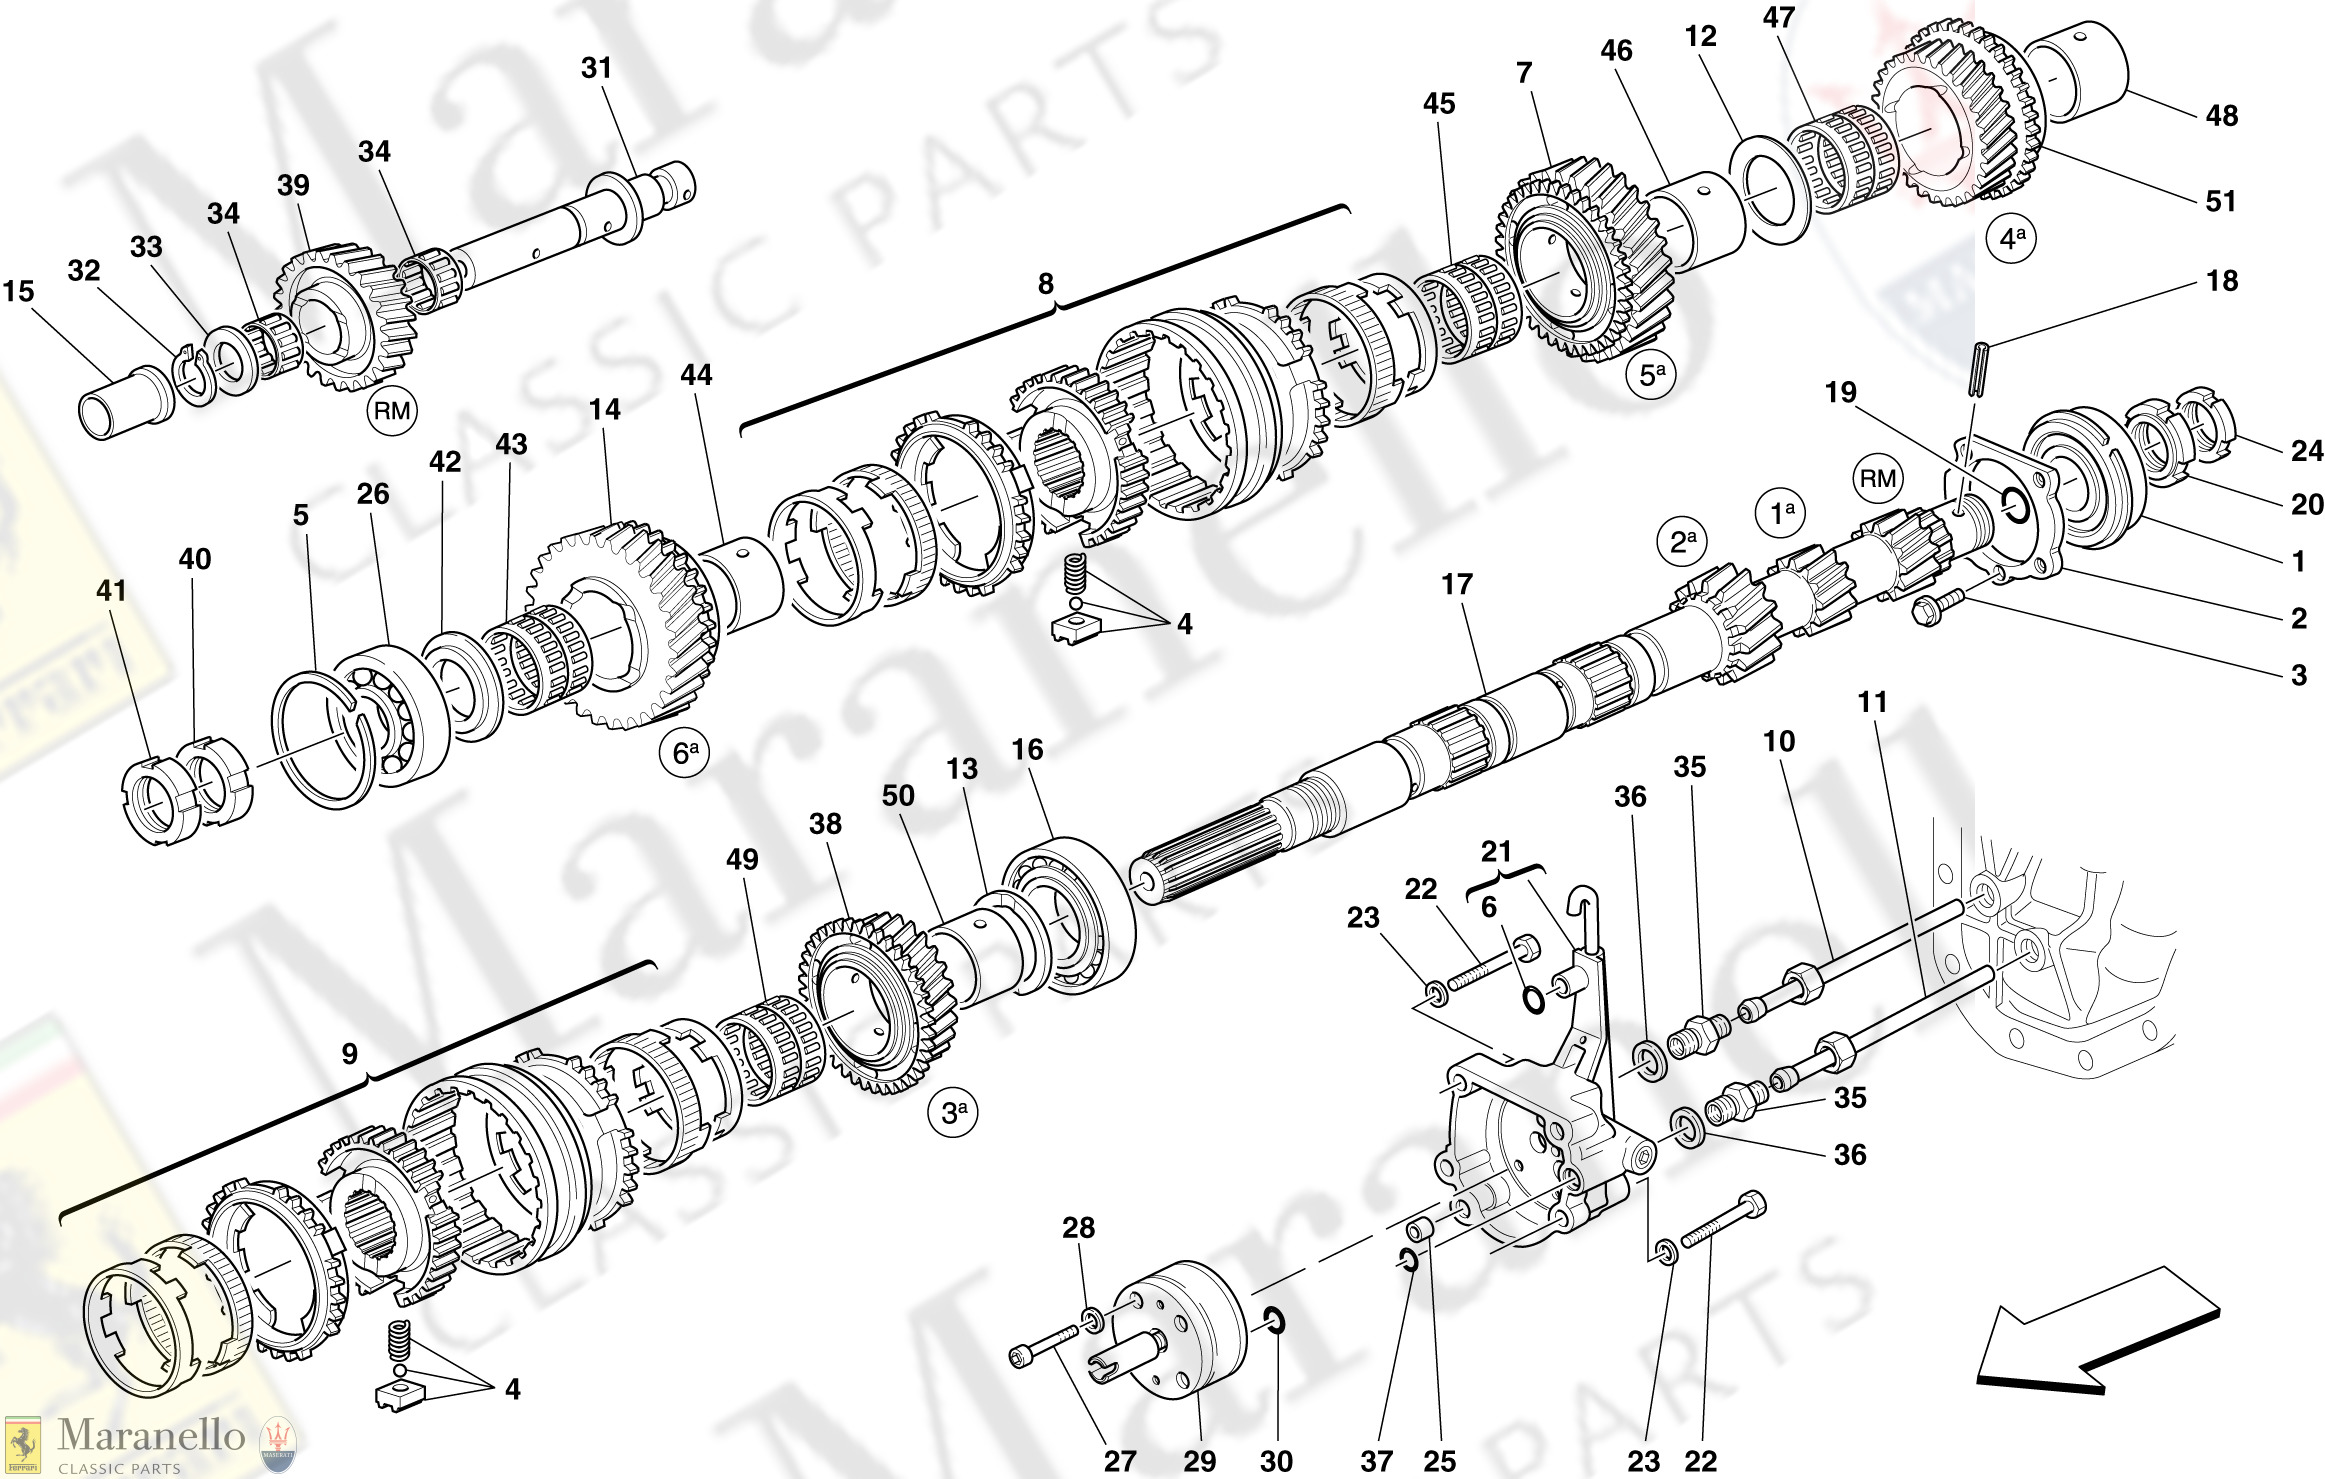 026 - Primary Gearbox Shaft Gears And Gearbox Oil Pump